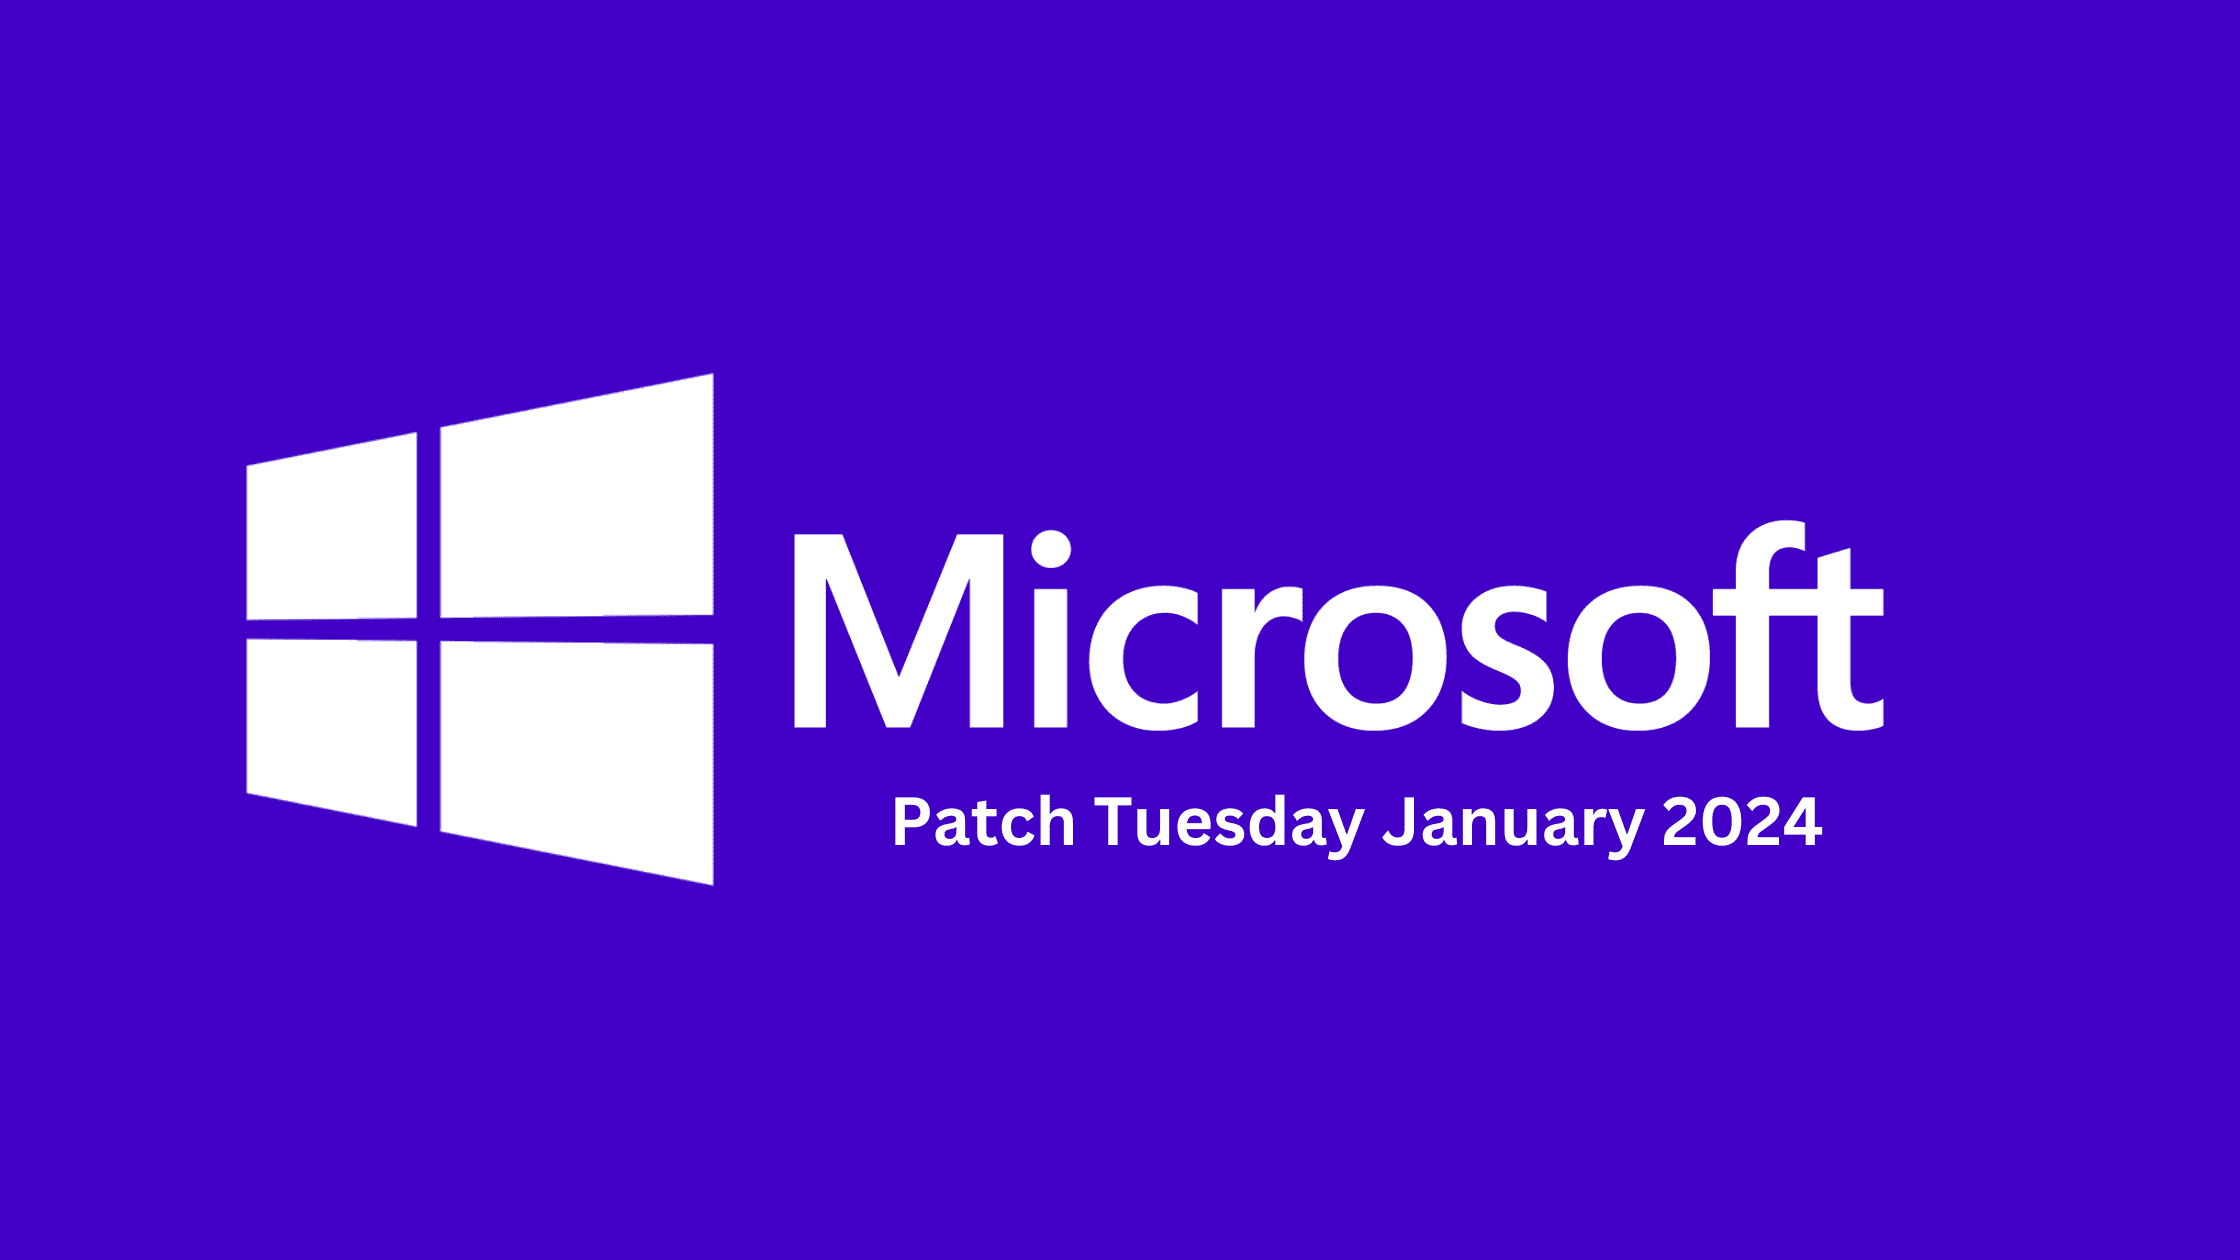 Breaking Down The Latest January 2024 Patch Tuesday Report